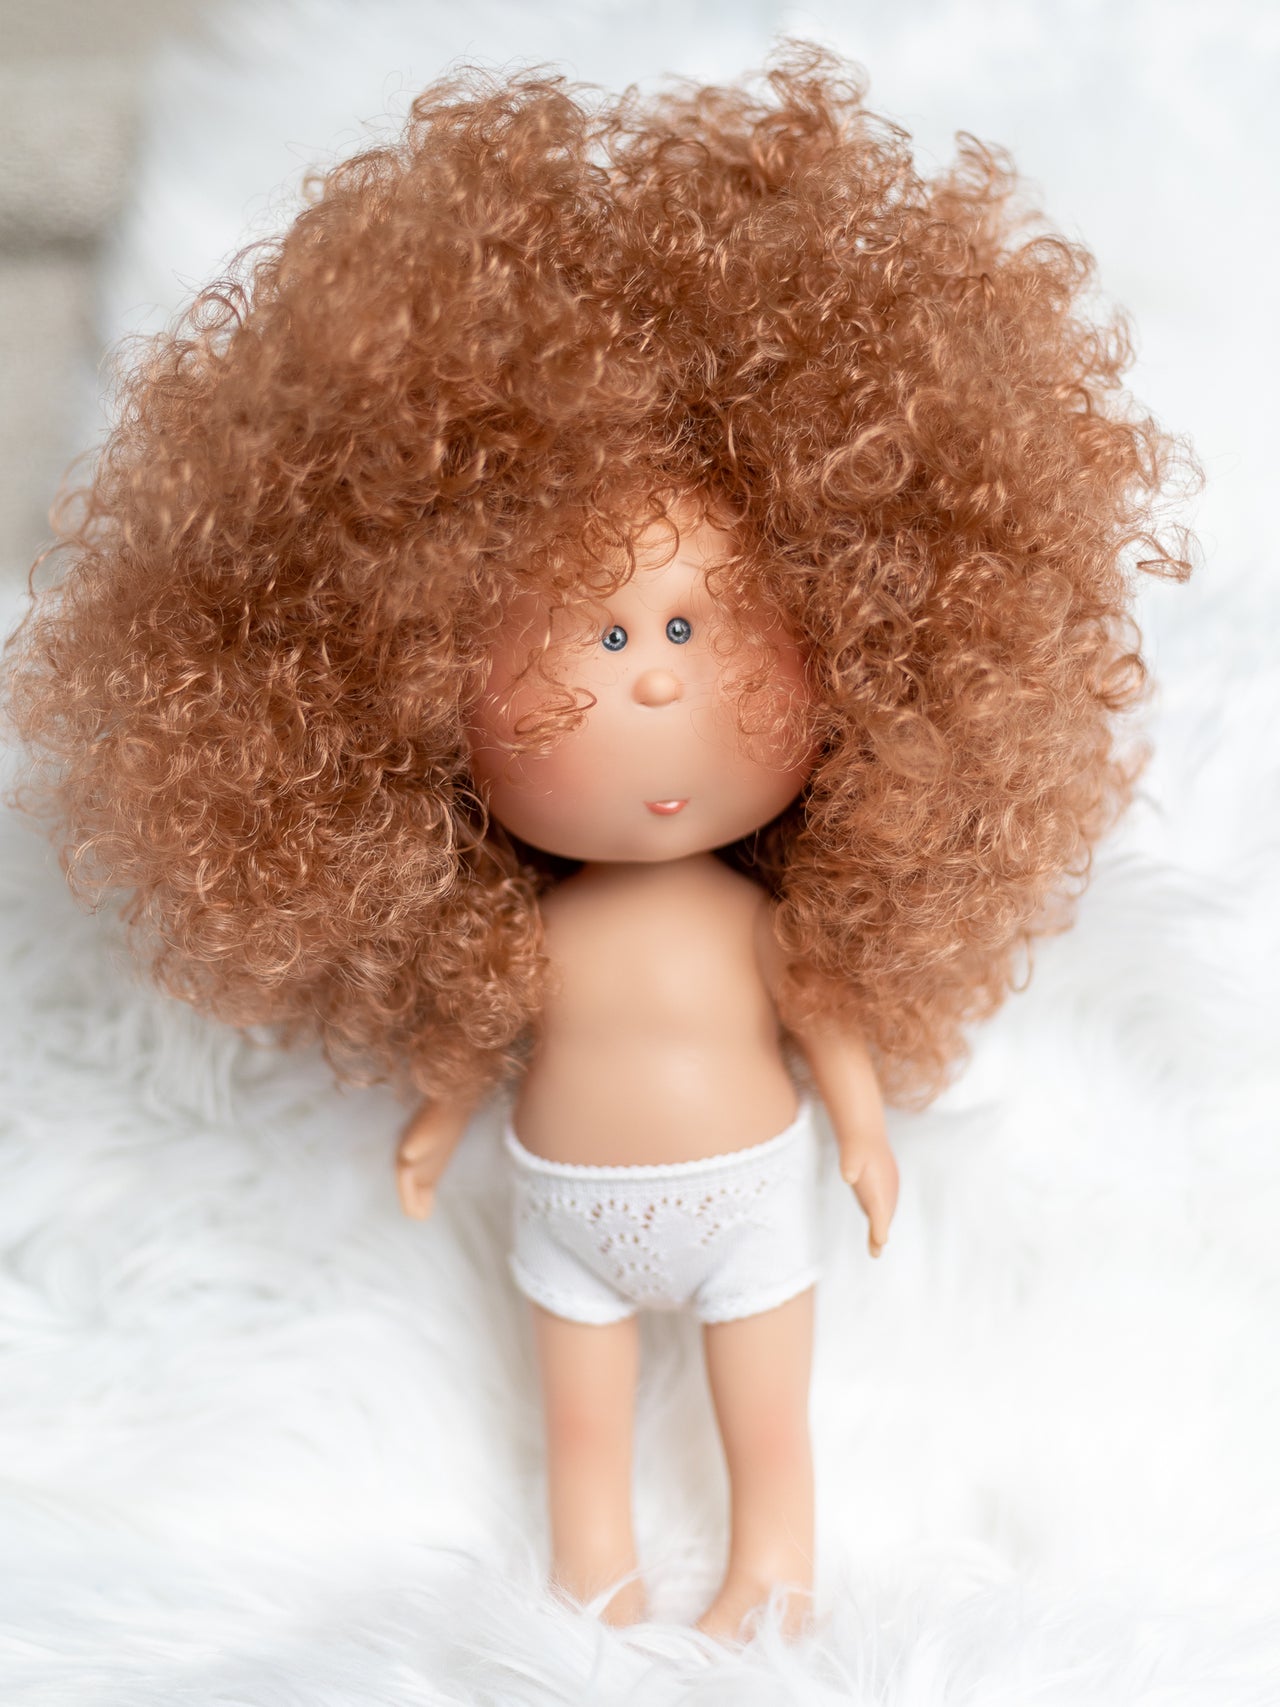 Adeline - Mia Doll with Curly Auburn Red Hair